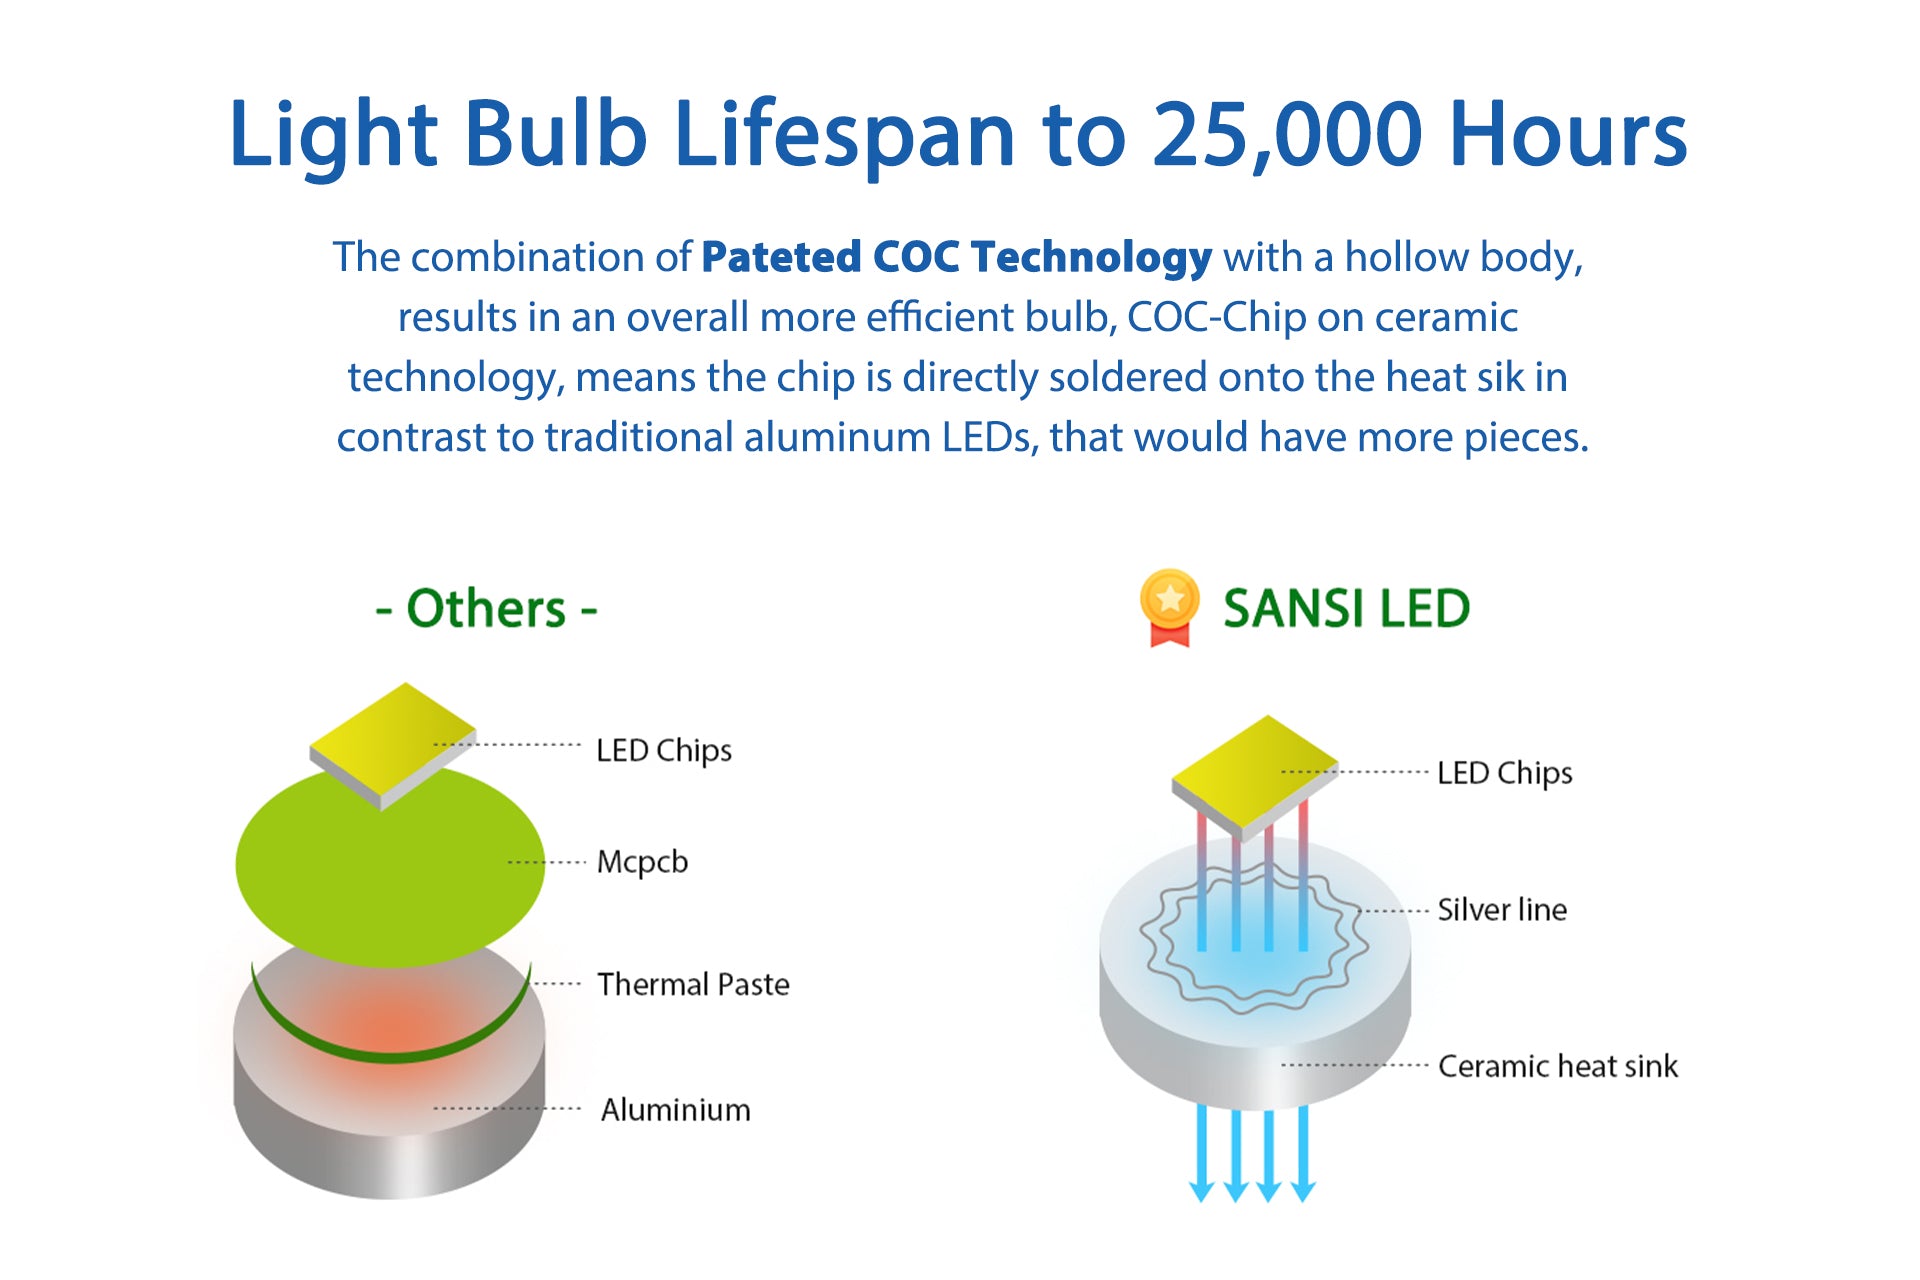 Light Bulb Lifespan to 25,000 Hours.The combination of Pateted COC Technology with a hollow body，results in an overall more efficient bulb, COC-Chip on ceramictechnology, means the chip is directly soldered onto the heat sik incontrast to traditional aluminum LEDs, that would have more pieces.